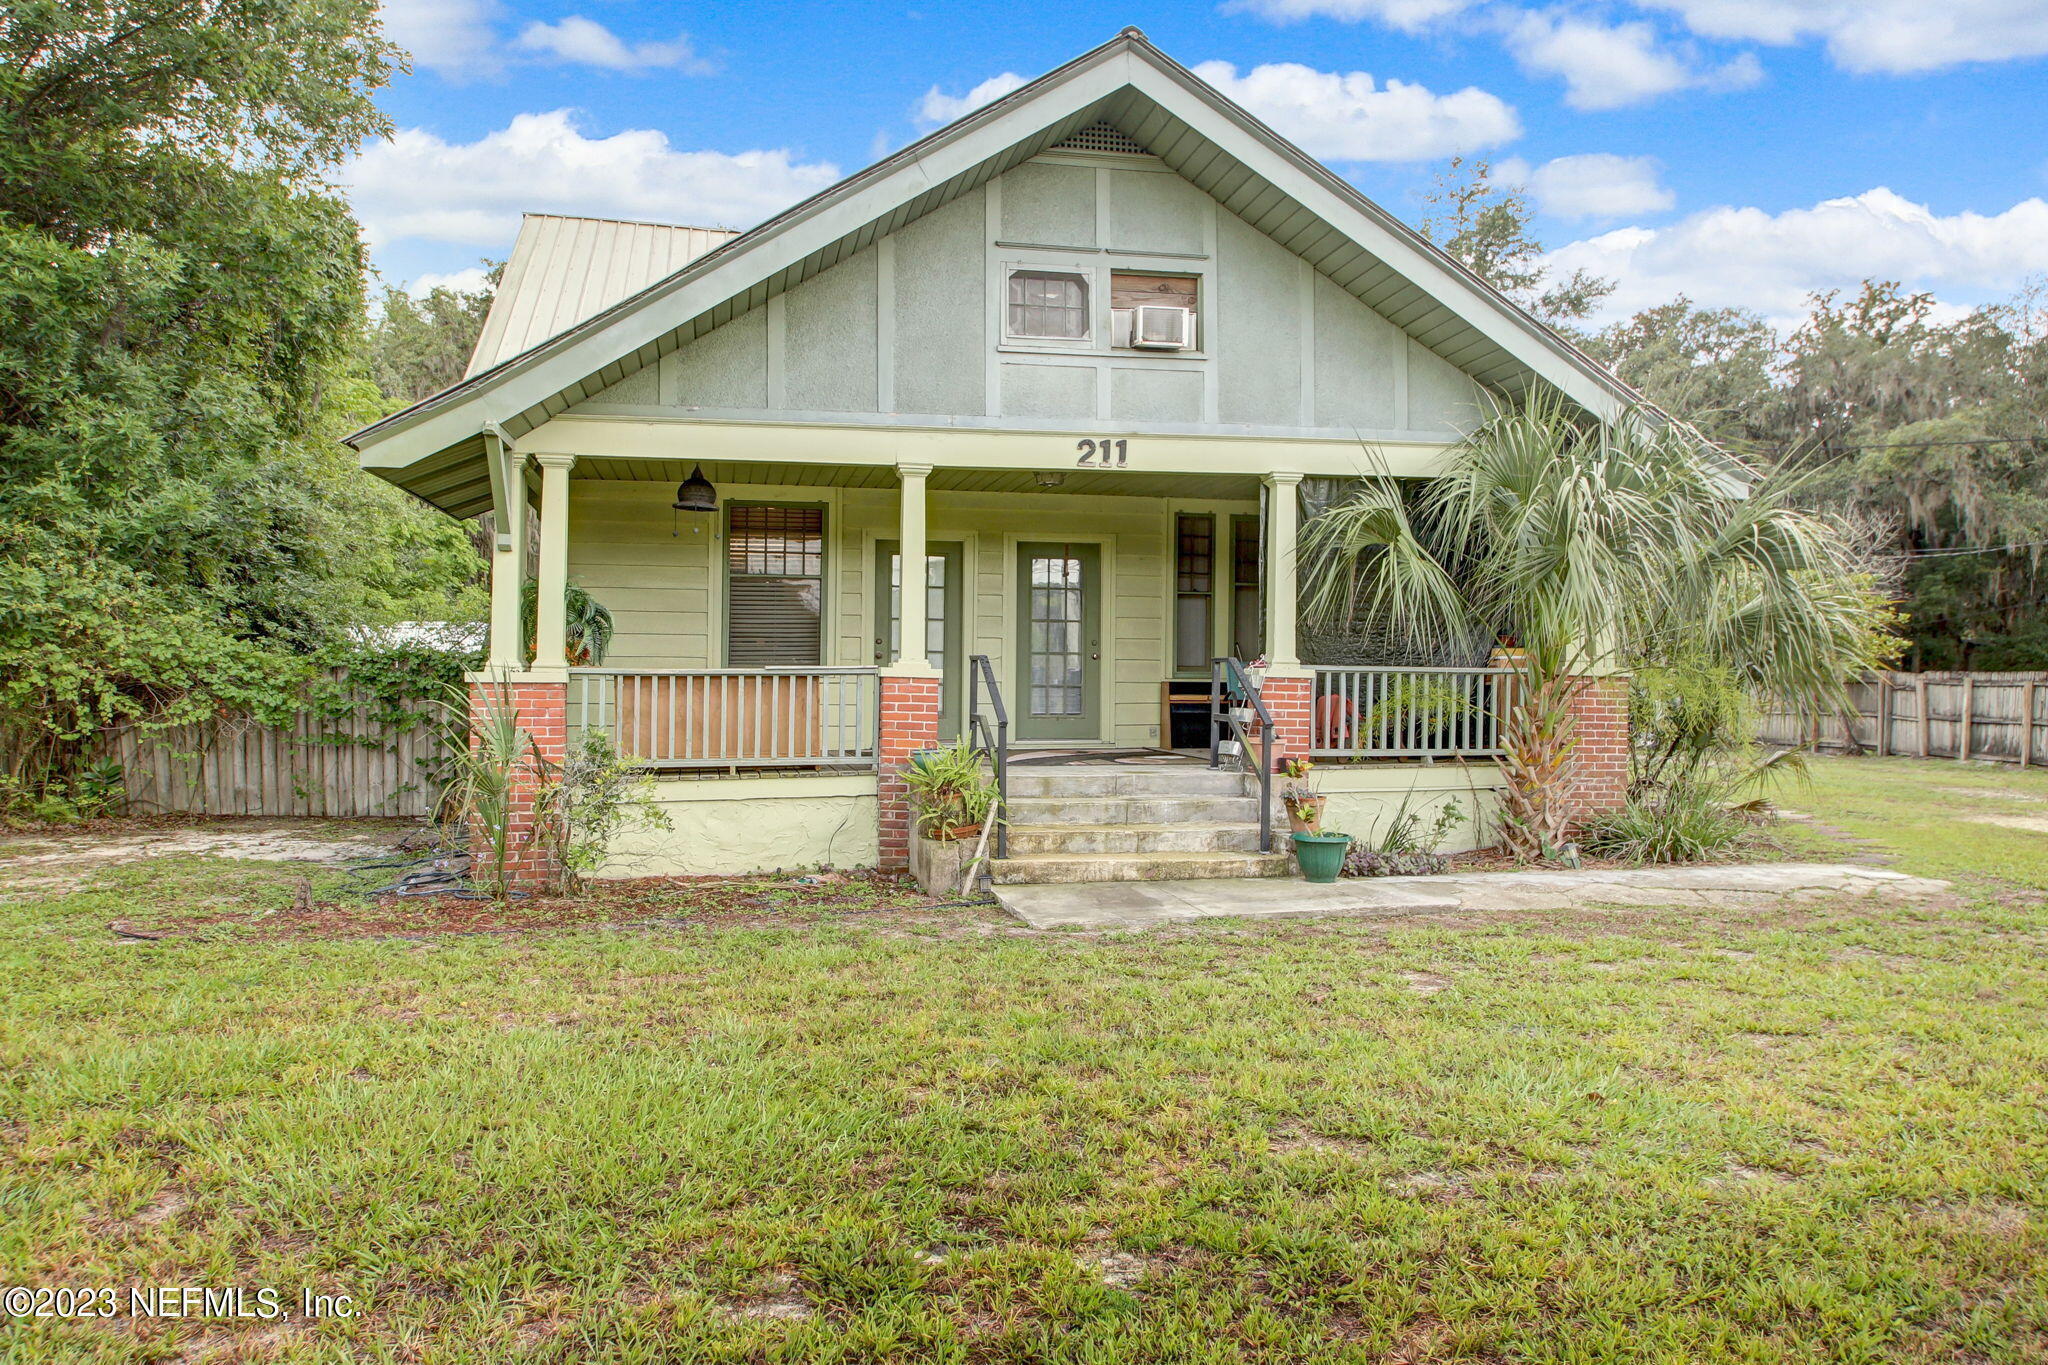 East Palatka, FL home for sale located at 211 Hwy 17, East Palatka, FL 32131